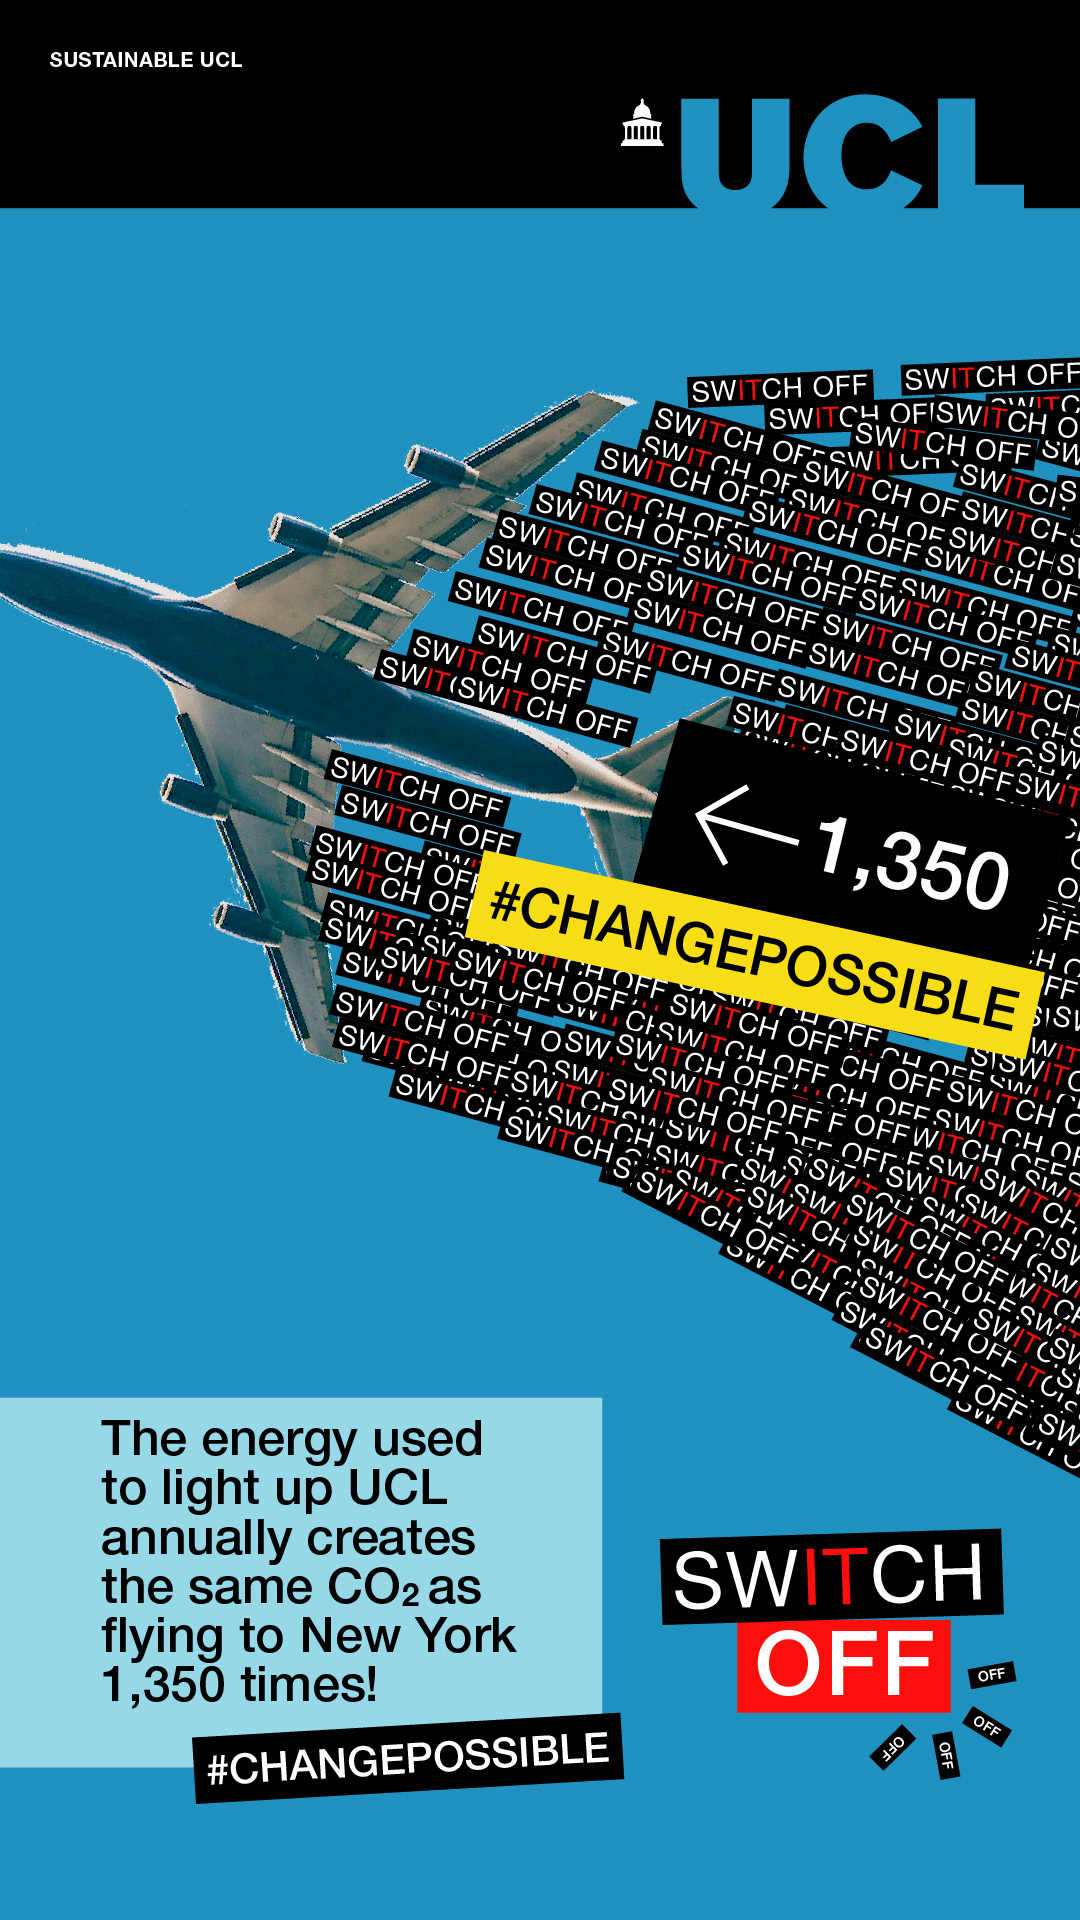 A plane with the text 'The energy used to light up UCL annually creates the same CO2 as flying to New York 1,350 times!'